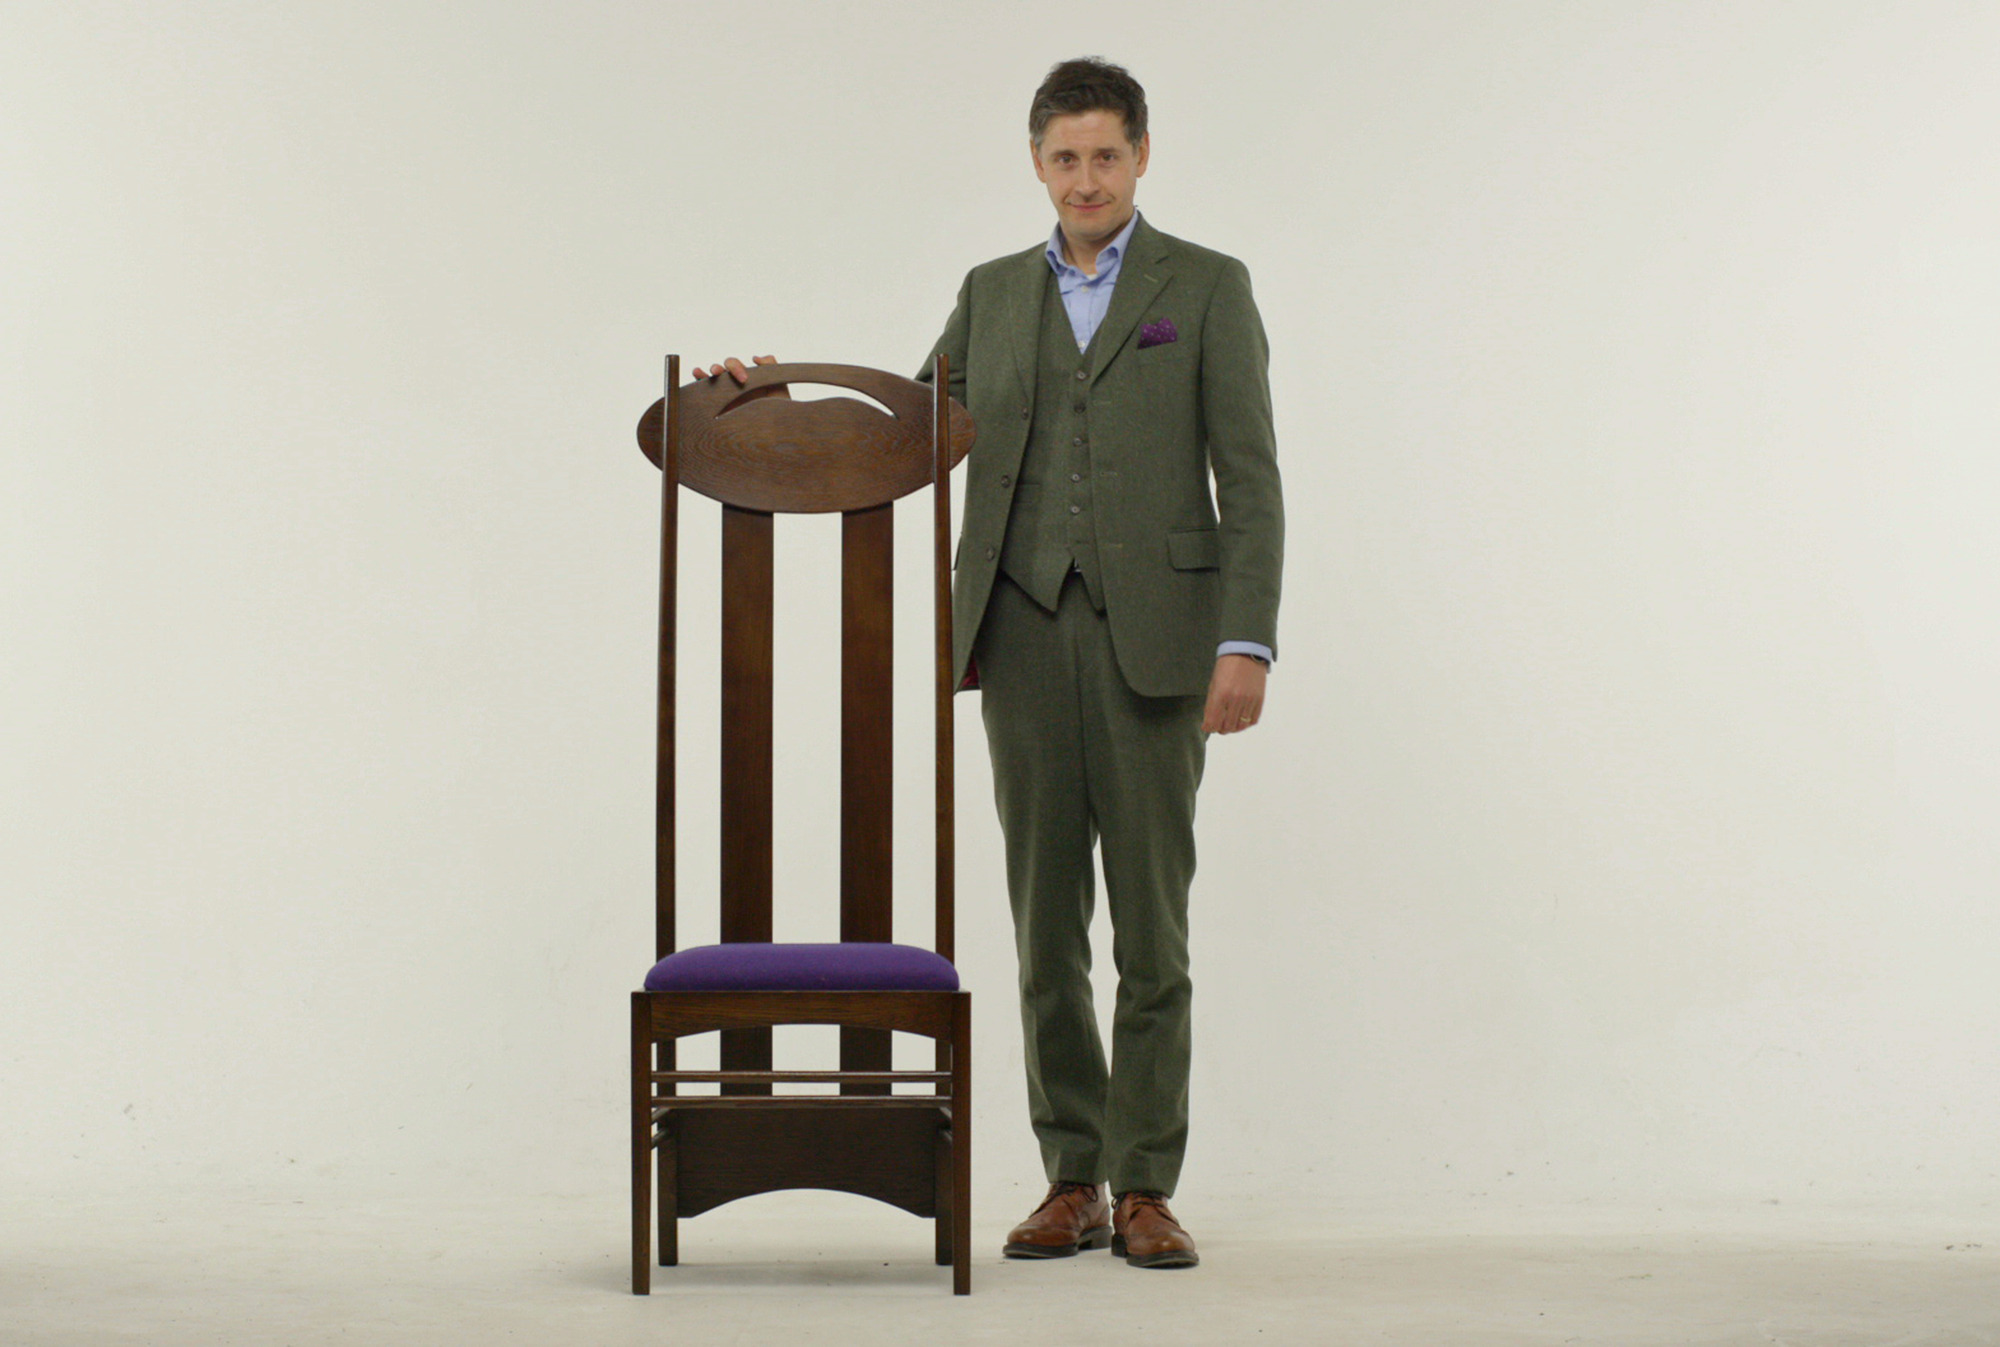 Programme Name: Mackintosh: Glasgow's Neglected Genius - TX: 05/06/2018 - Episode: Mack/tosh1 (No. n/a) - Picture Shows: Artist Lachlan Goudie with one of Charles Rennie Mackintosh's iconic chairs Lachlan Goudie - (C) BBC Studios - Photographer: BBC Studios